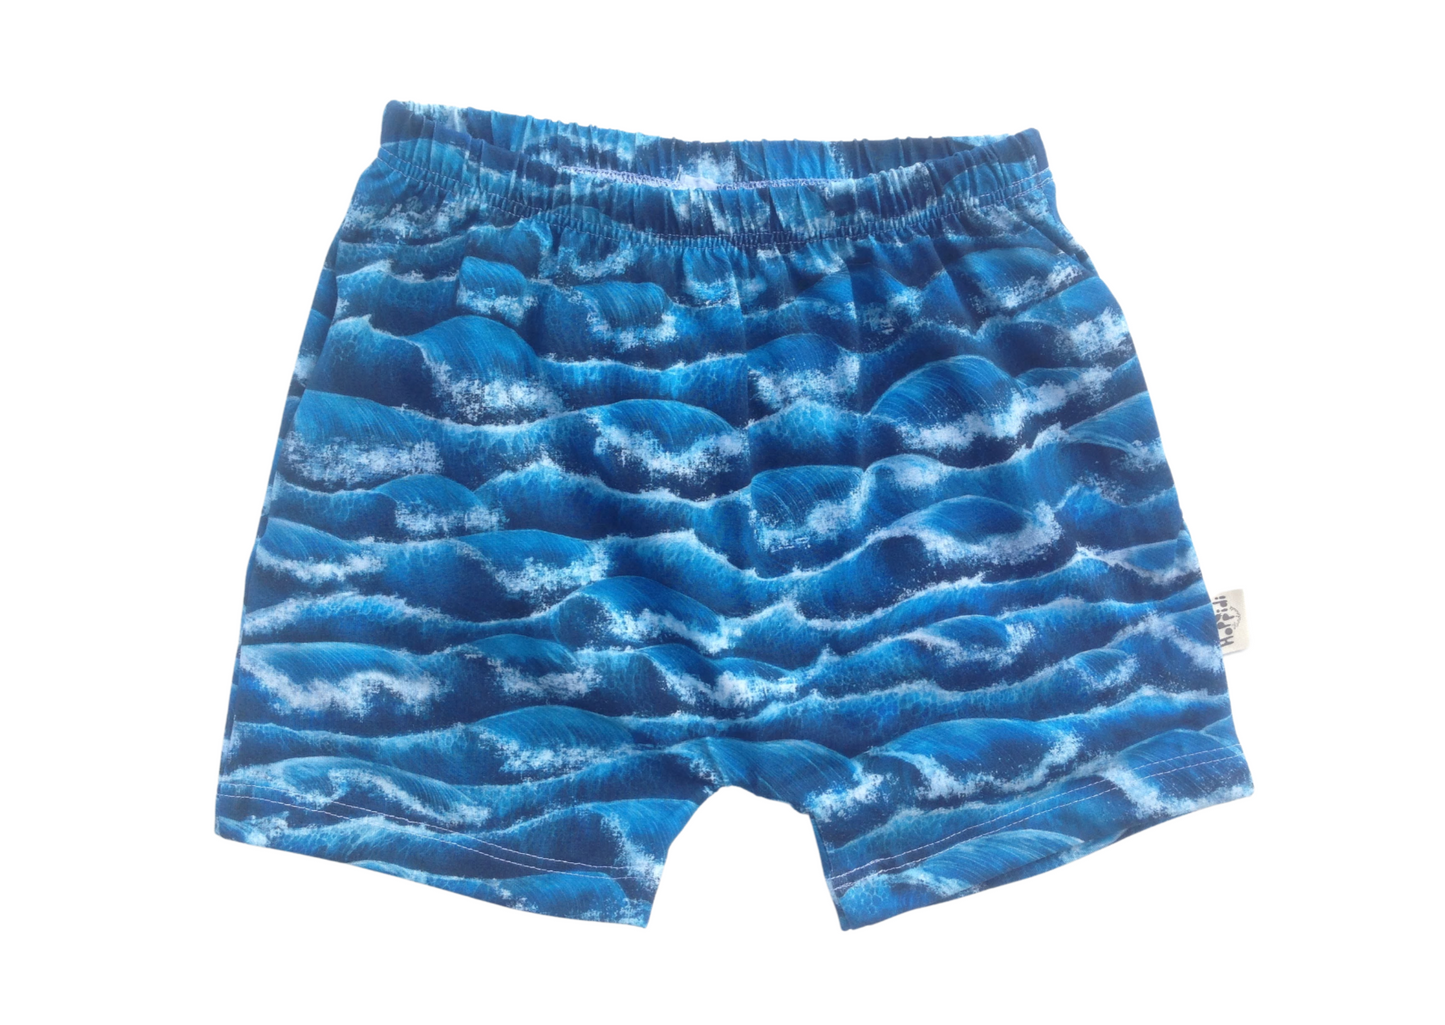 Ocean Waves Boy Shorts (for girls too! :)